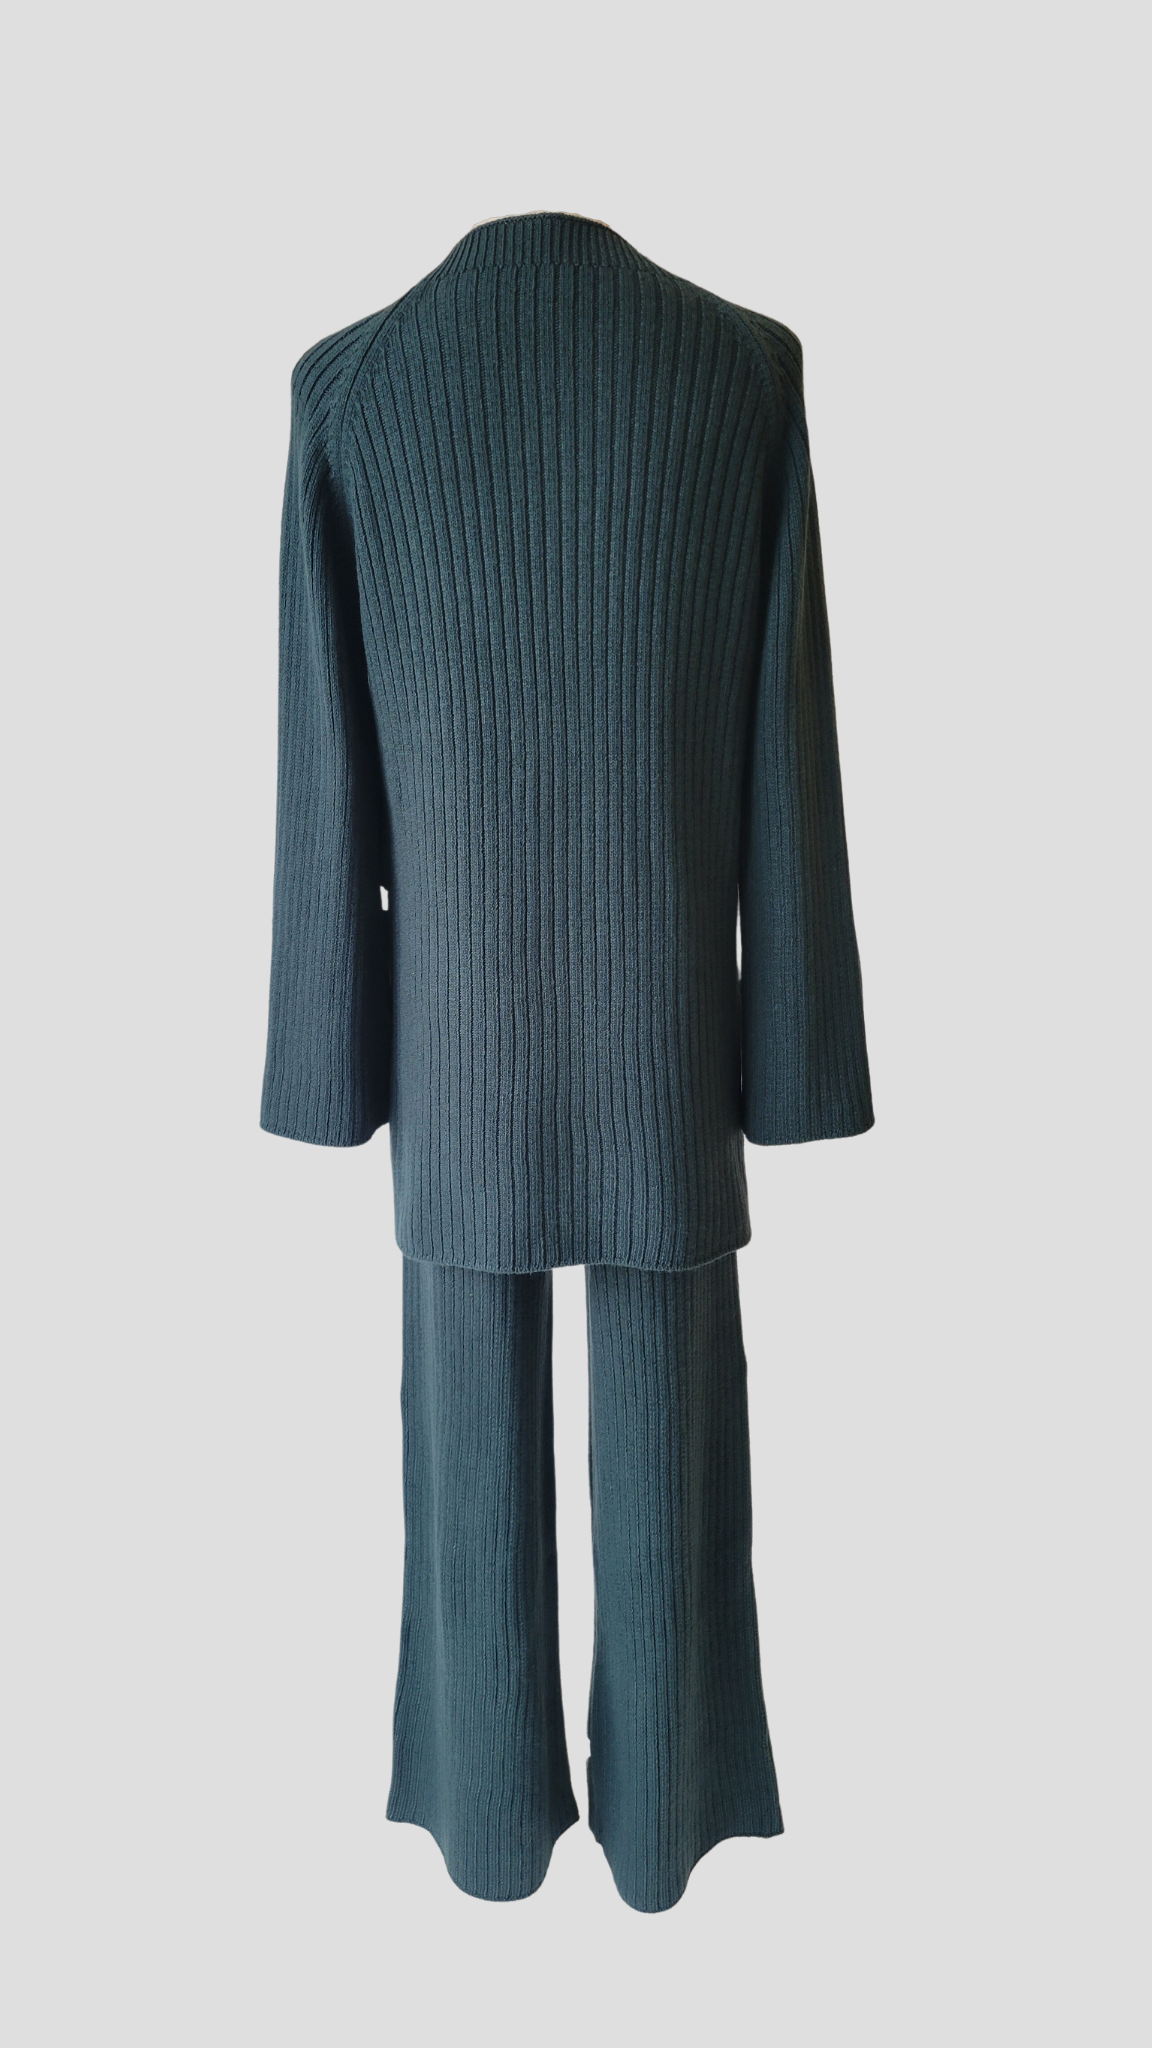 A chic two-piece knit co-ord set in 'Spruce', a dark teal colour. The set includes a comfy sweater with a relaxed fit and matching knit pants. Perfect for a stylish and cozy look.